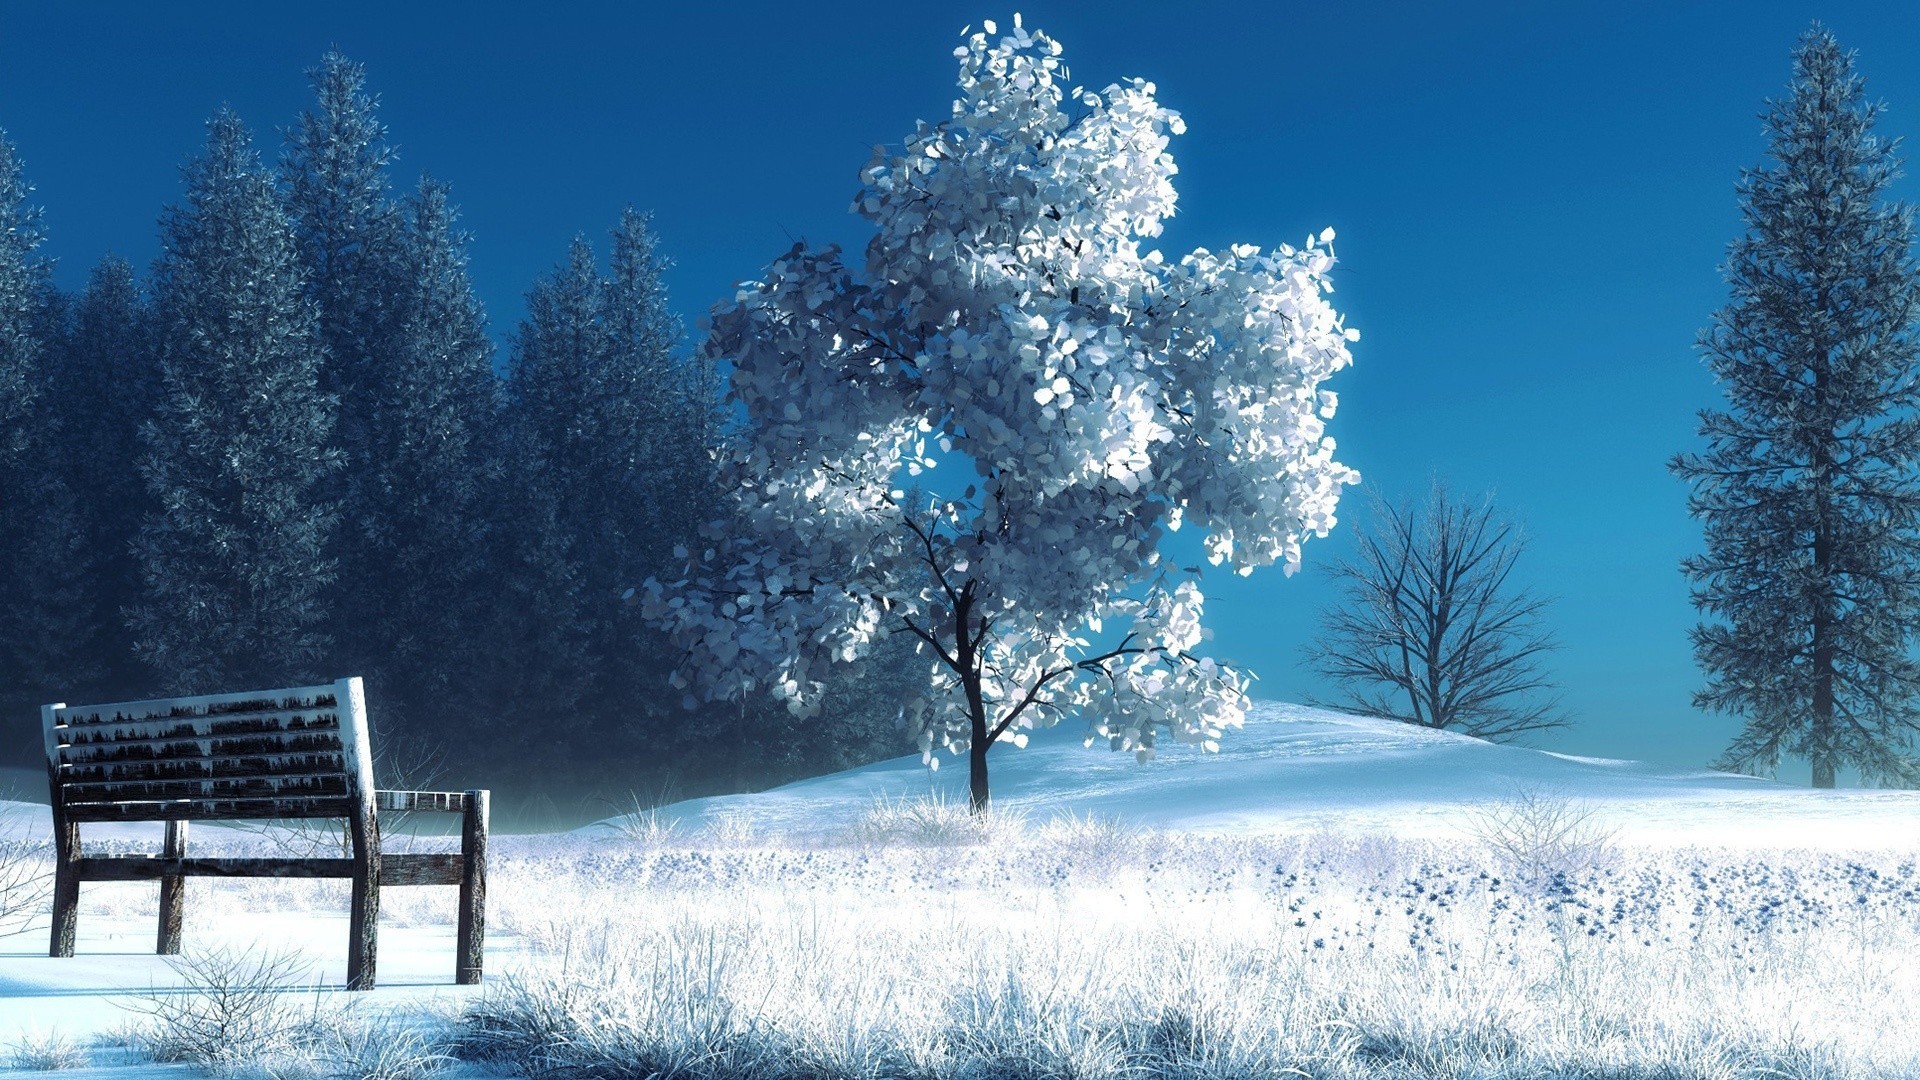 Preview wallpaper winter, landscape, nature, snow, bench, trees 1920×1080